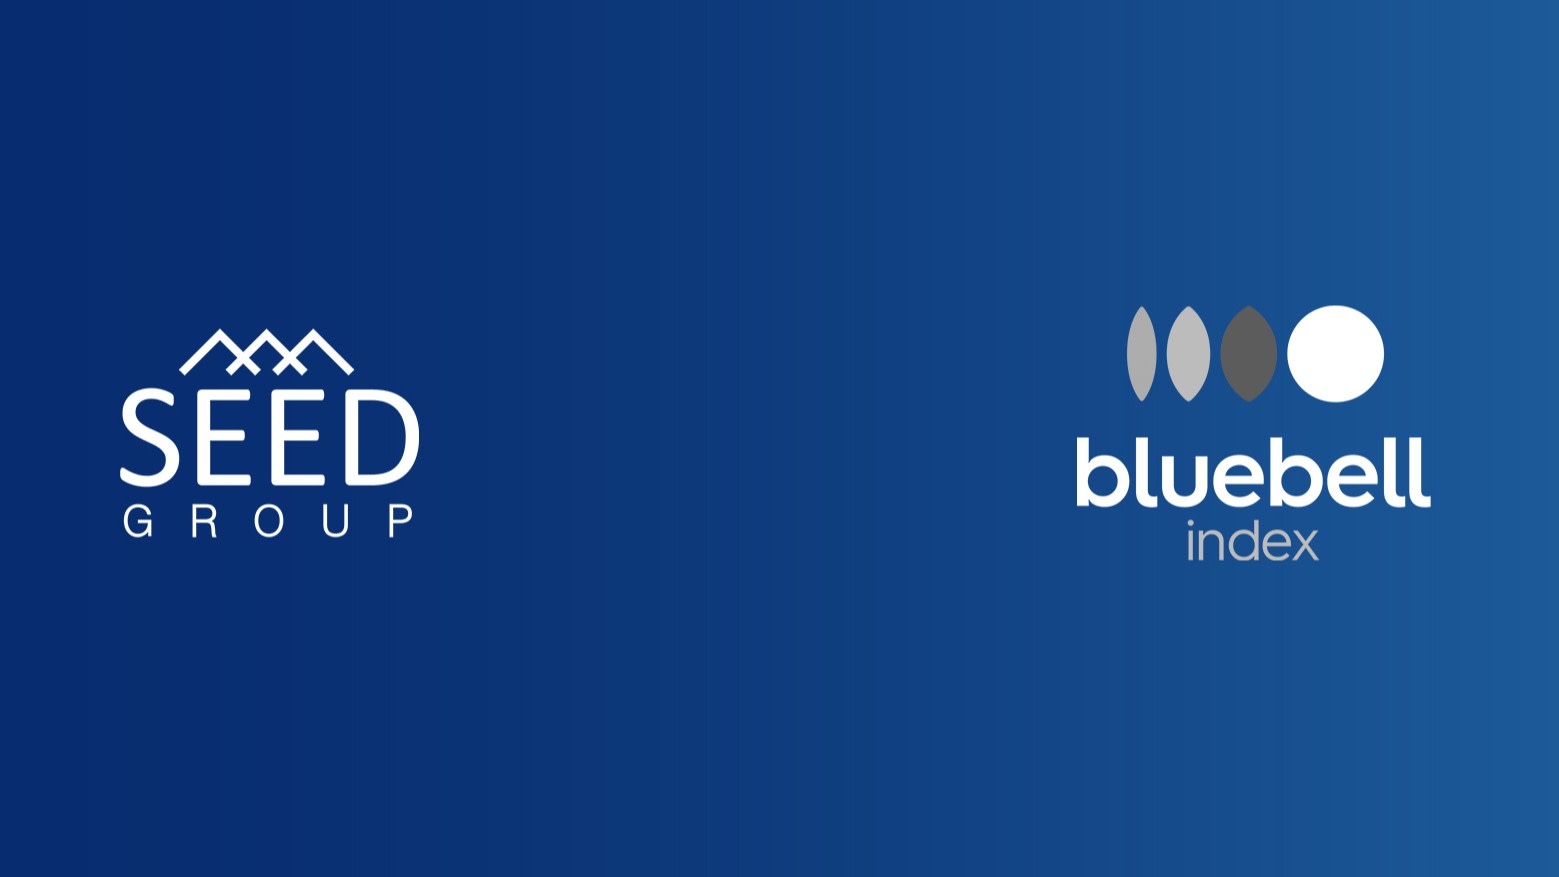 KnowESG_Seed Group Goes Green with Bluebell Index Partnership